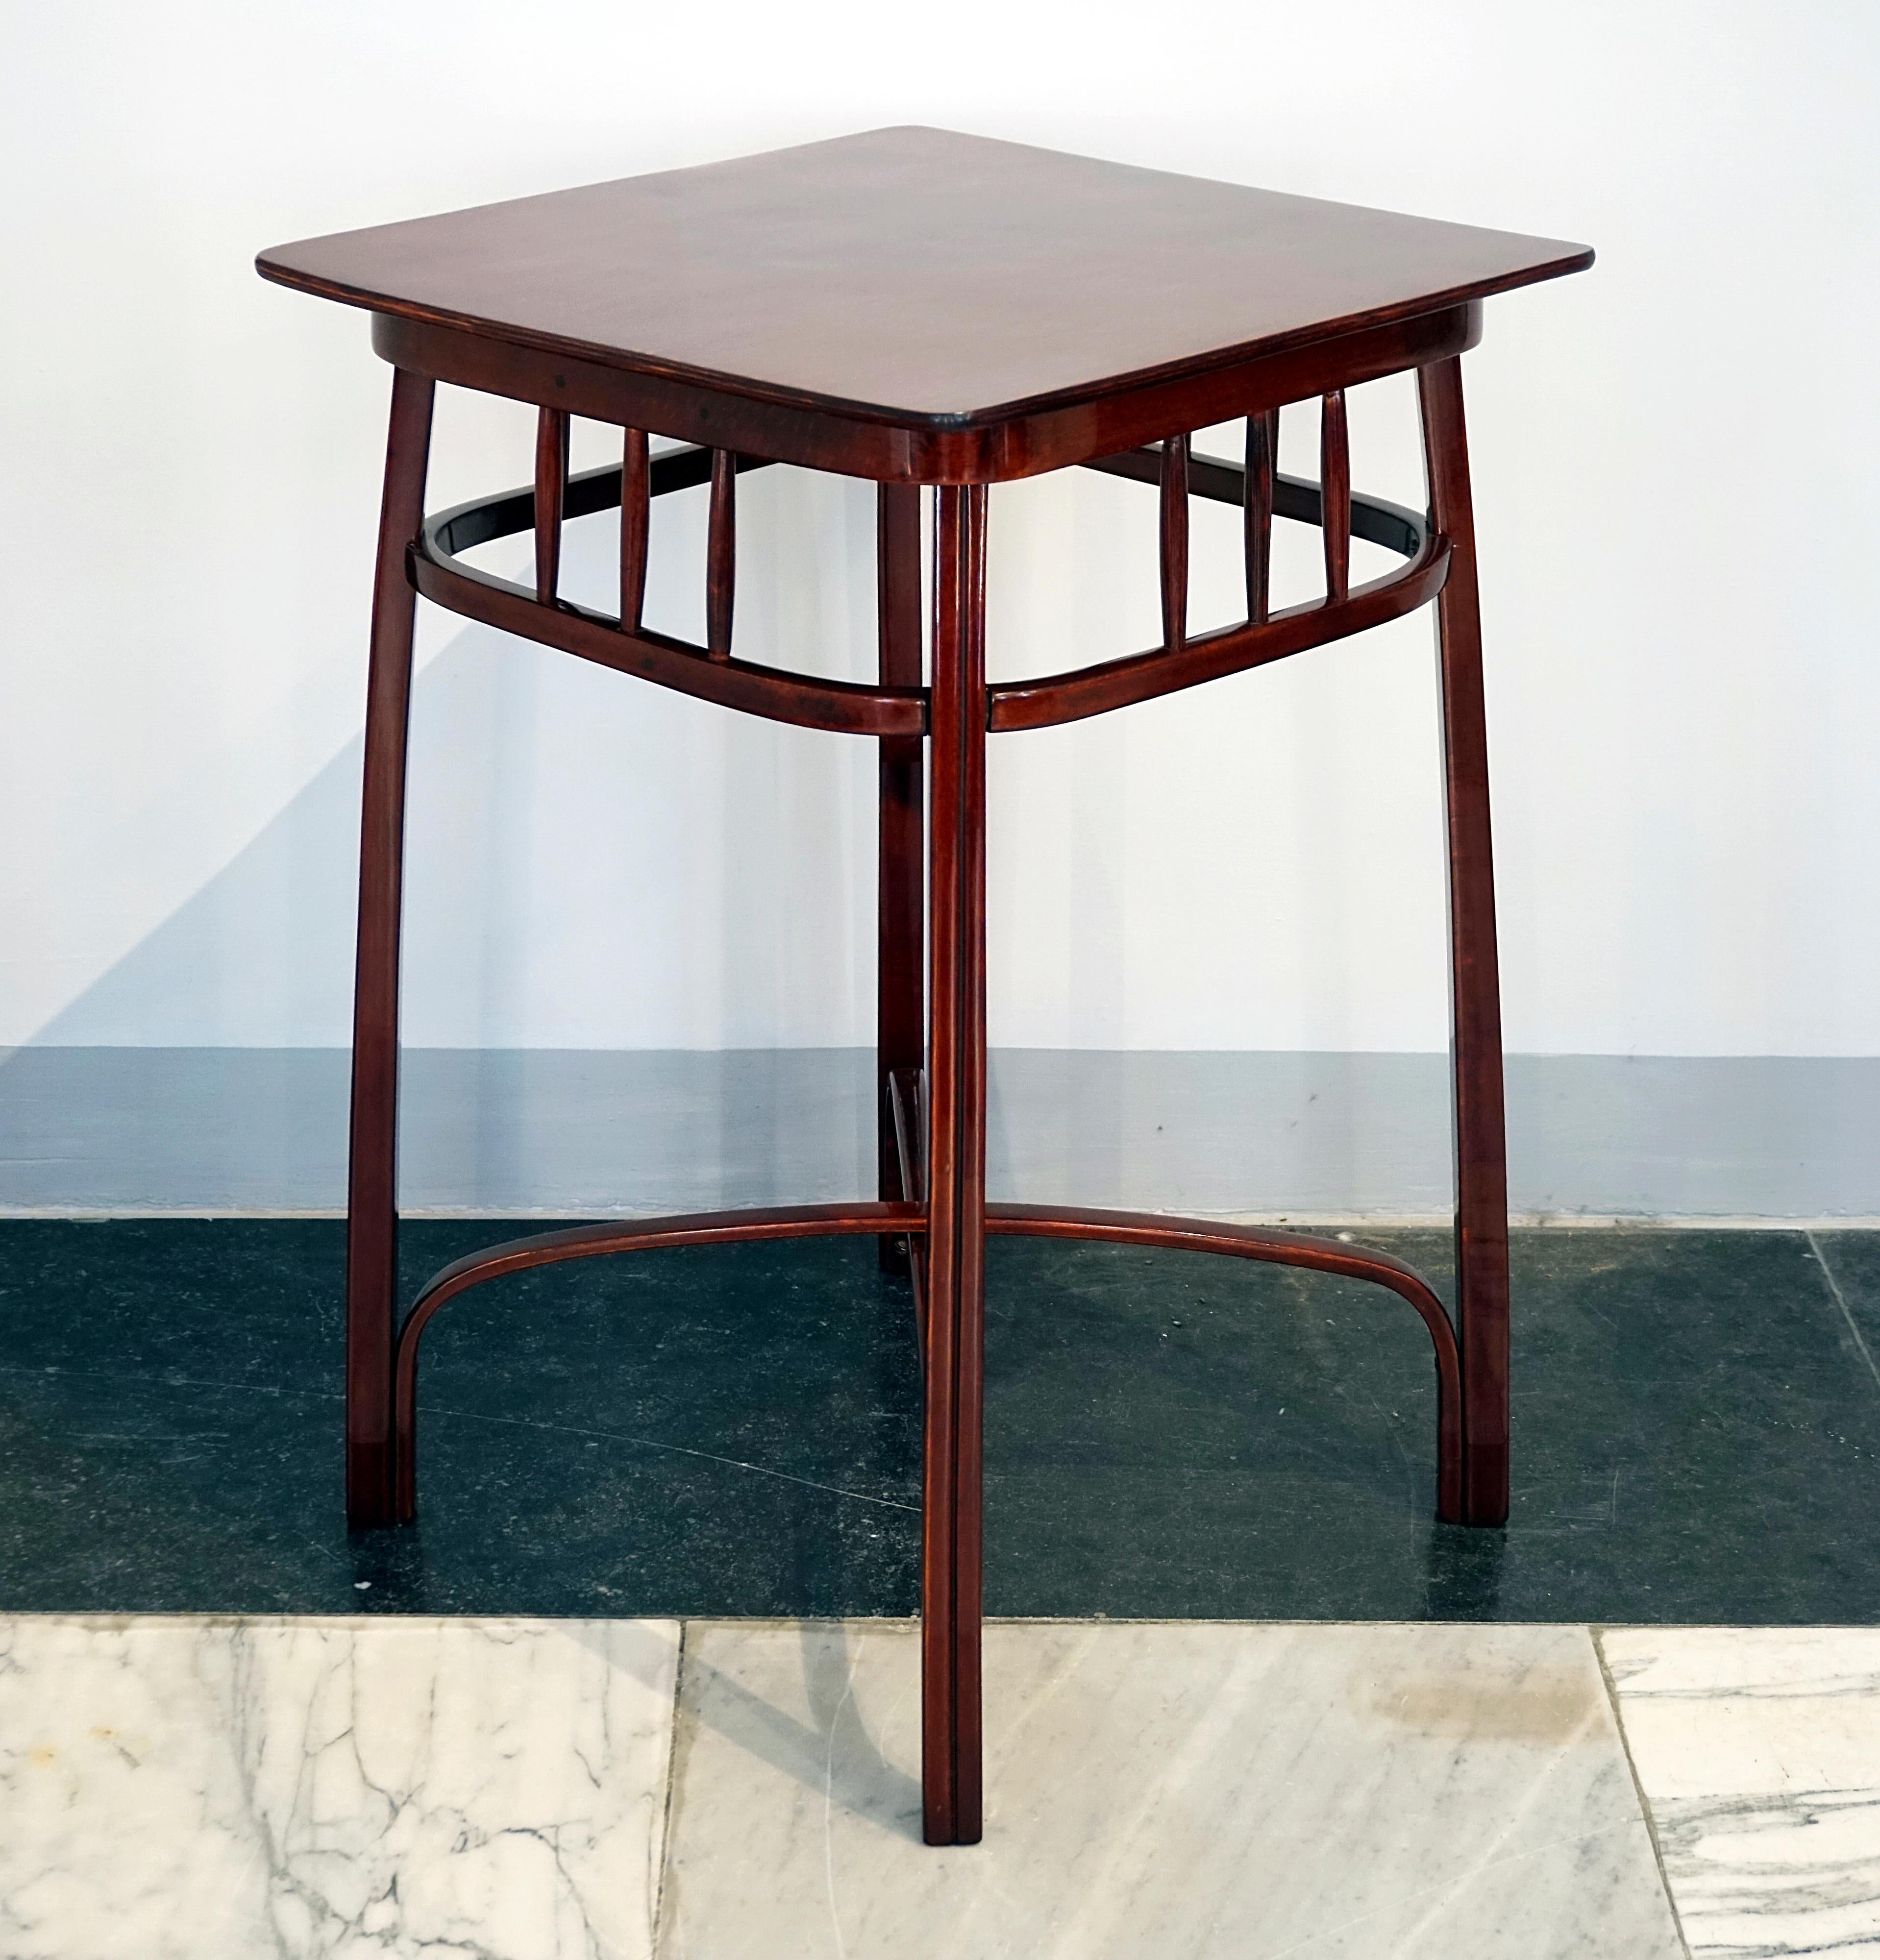 Elegant Art Nouveau waiting table, or flower table, on slightly outwardly curved legs, with decorative struts underneath the table top and in the base area.
High-quality handcrafted furniture with decorative bentwood elements that combine formal